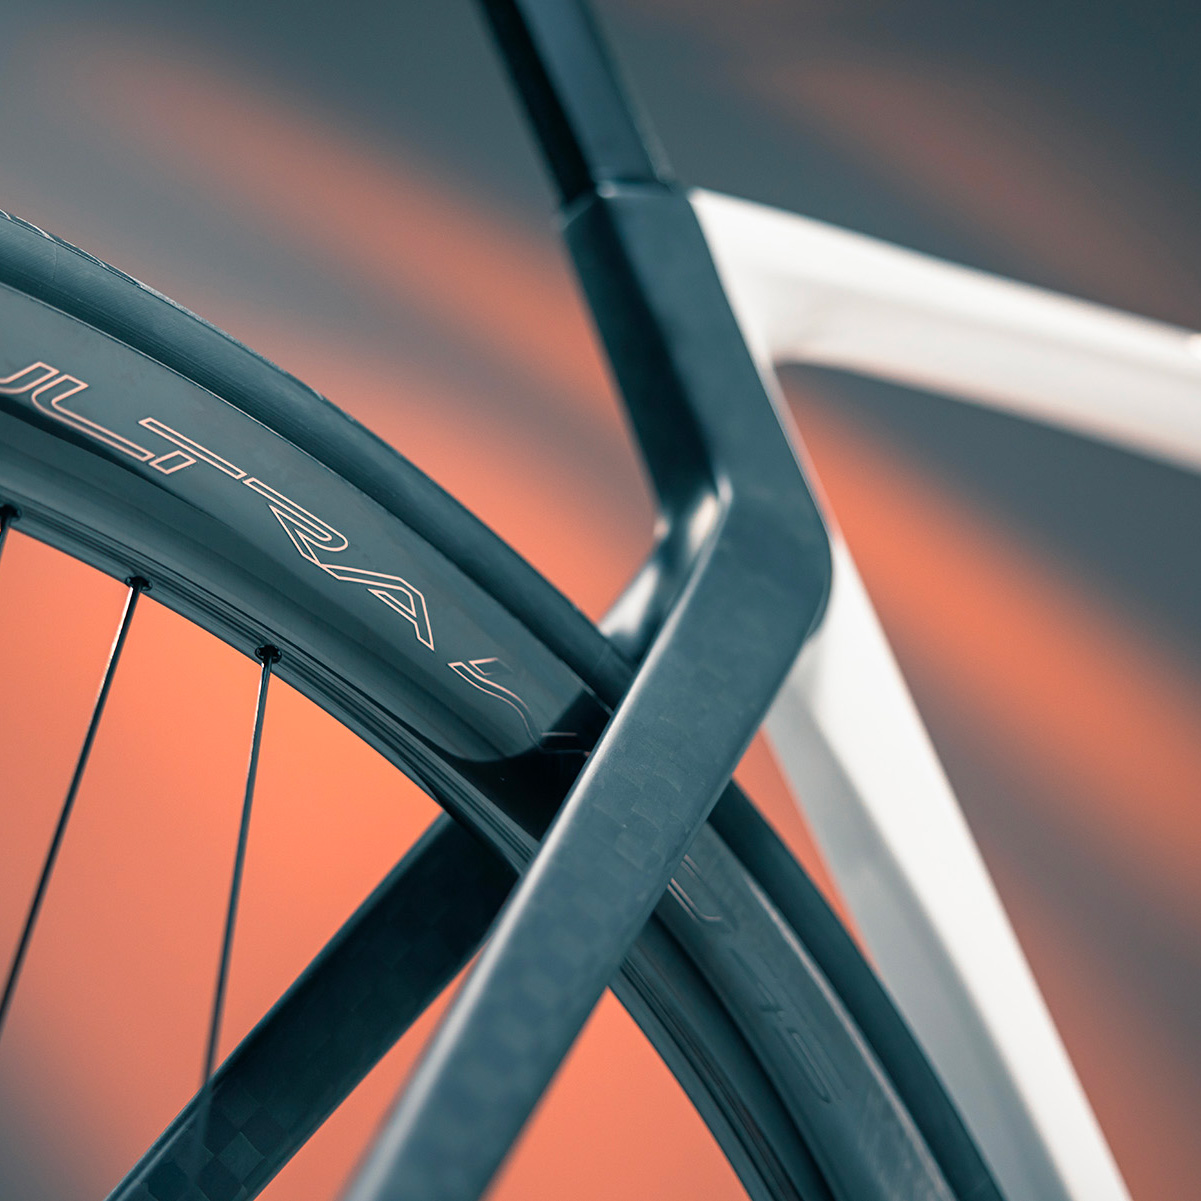 Tubeless wheelsets: features and benefits